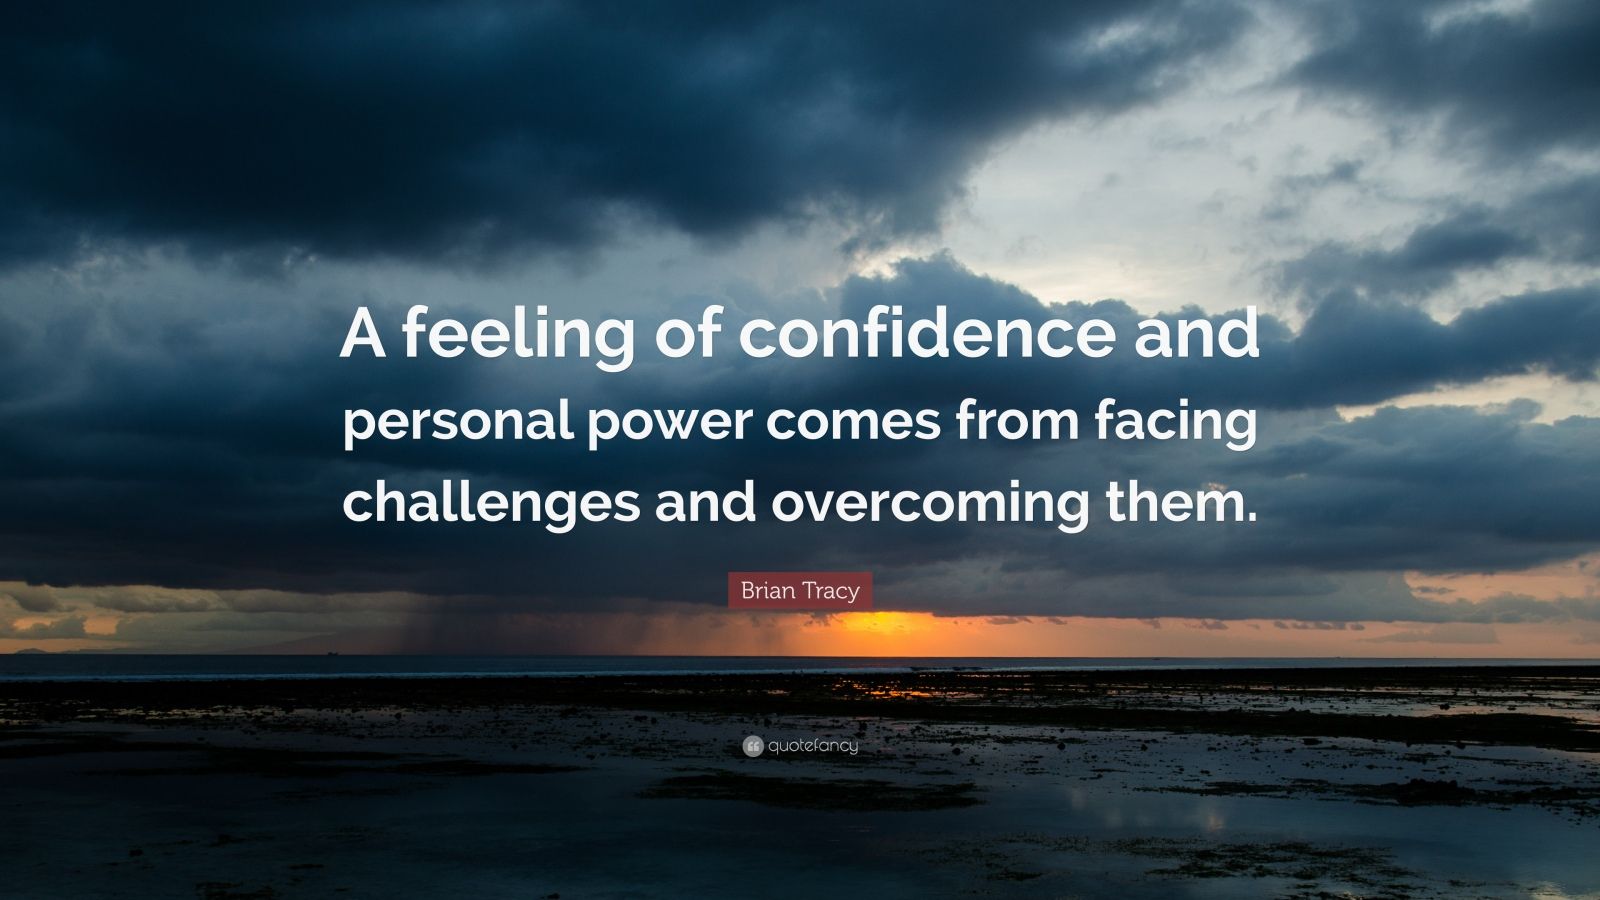 Brian Tracy Quote: “A feeling of confidence and personal power comes